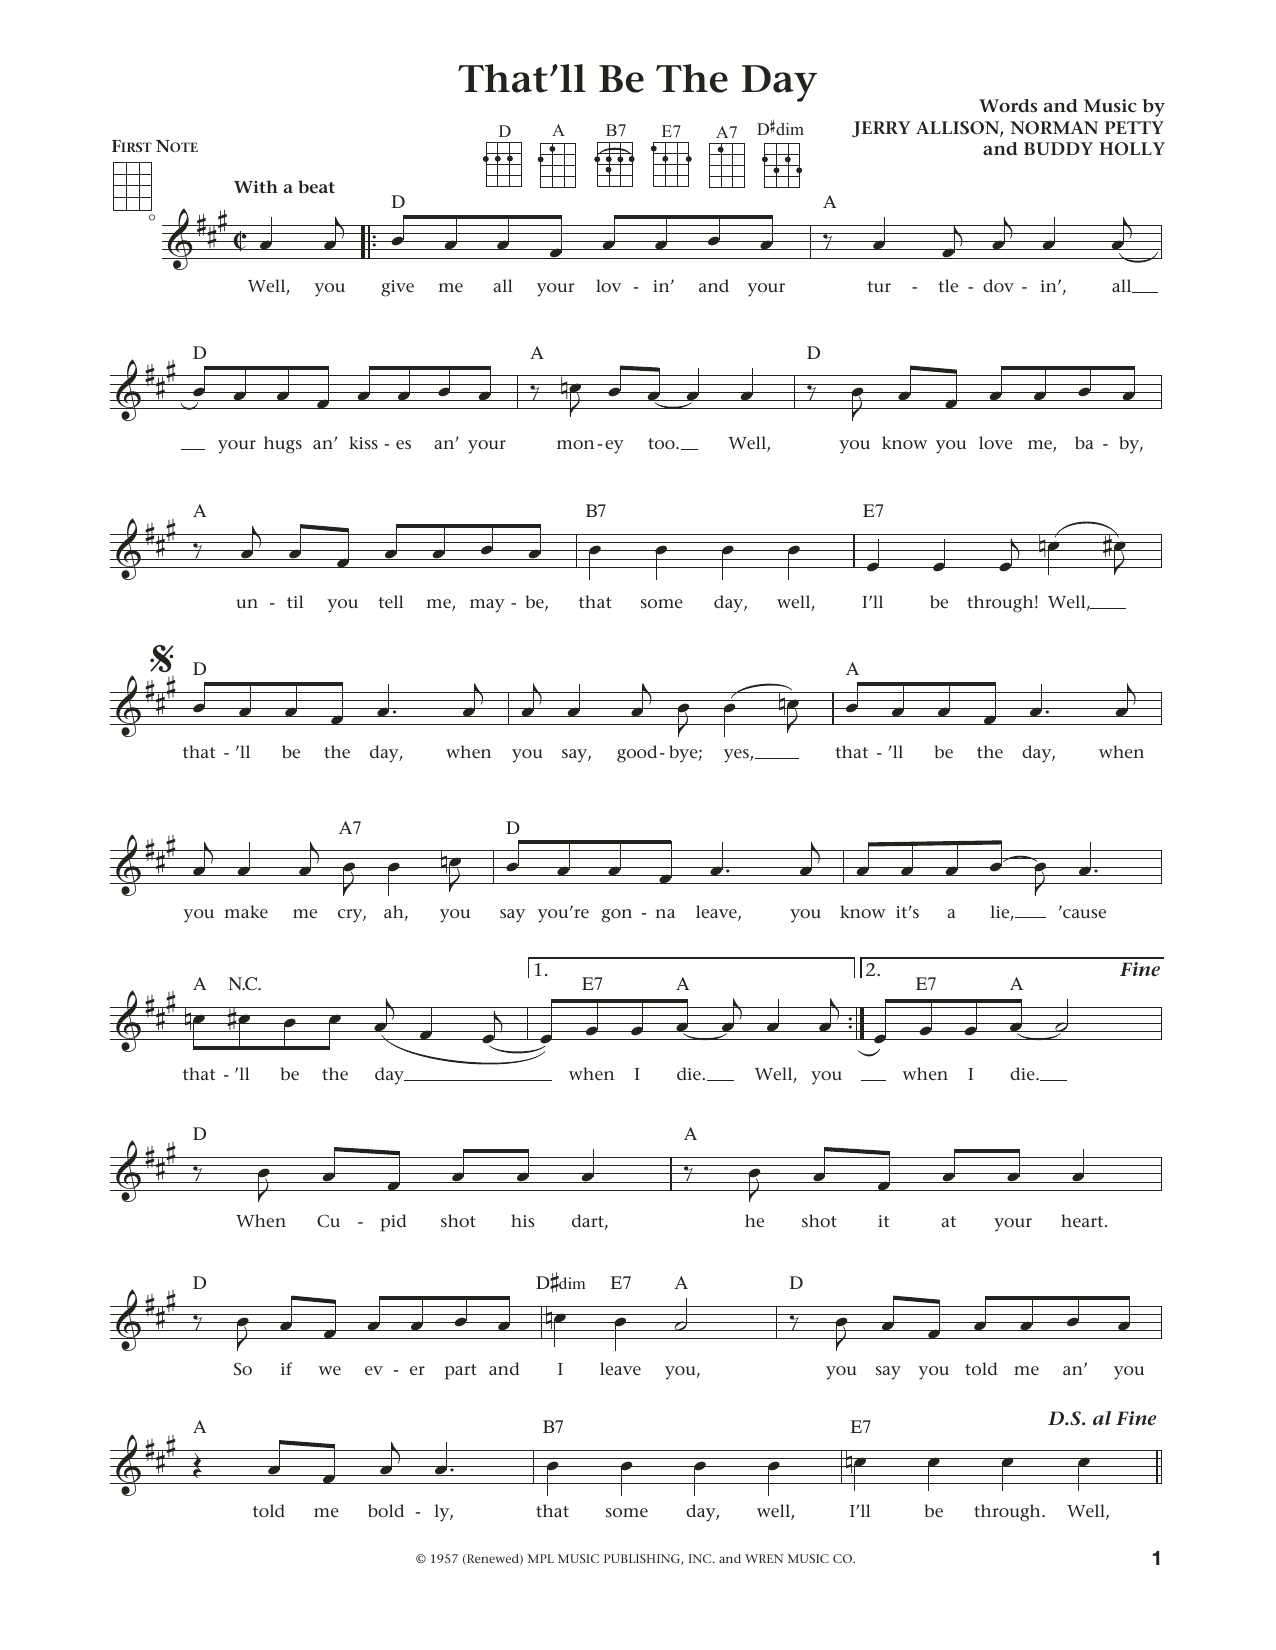 Download Buddy Holly That'll Be The Day (from The Daily Ukul Sheet Music